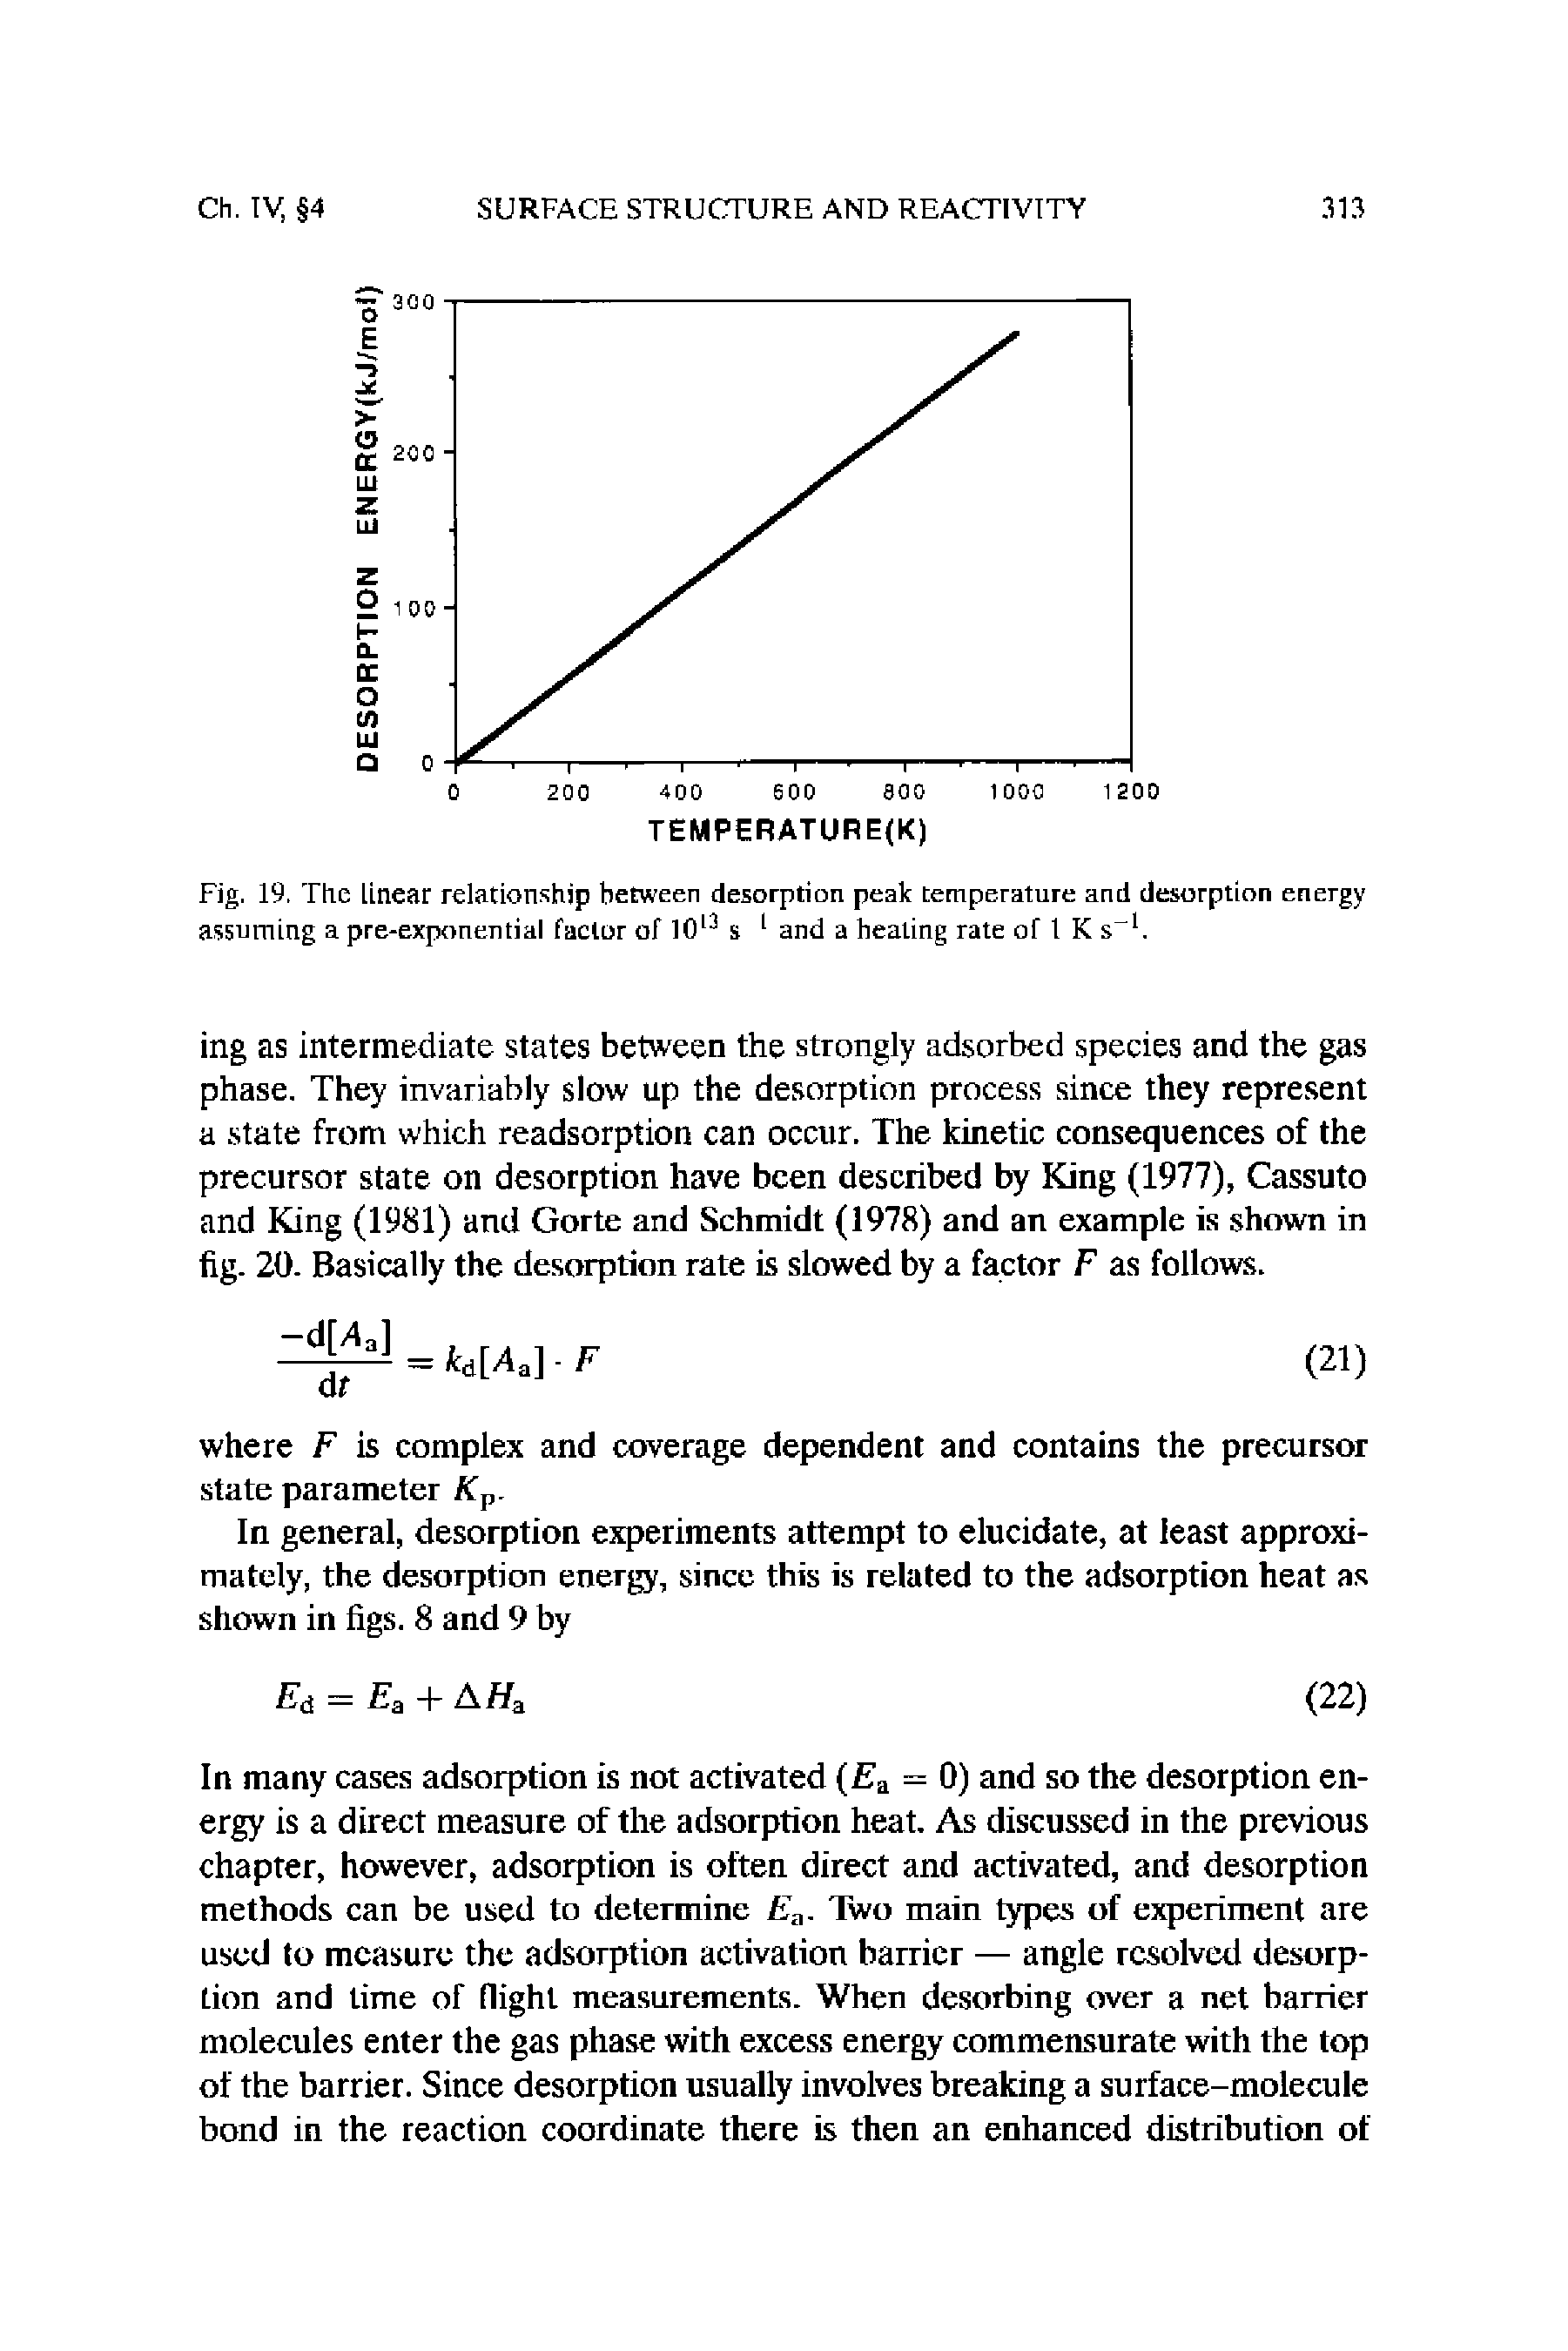 Fig. 19. The Linear relationship between desorption peak temperature and desorption energy assuming a pre-exponential factor of 1013 s 1 and a heating rate of I K s 1.